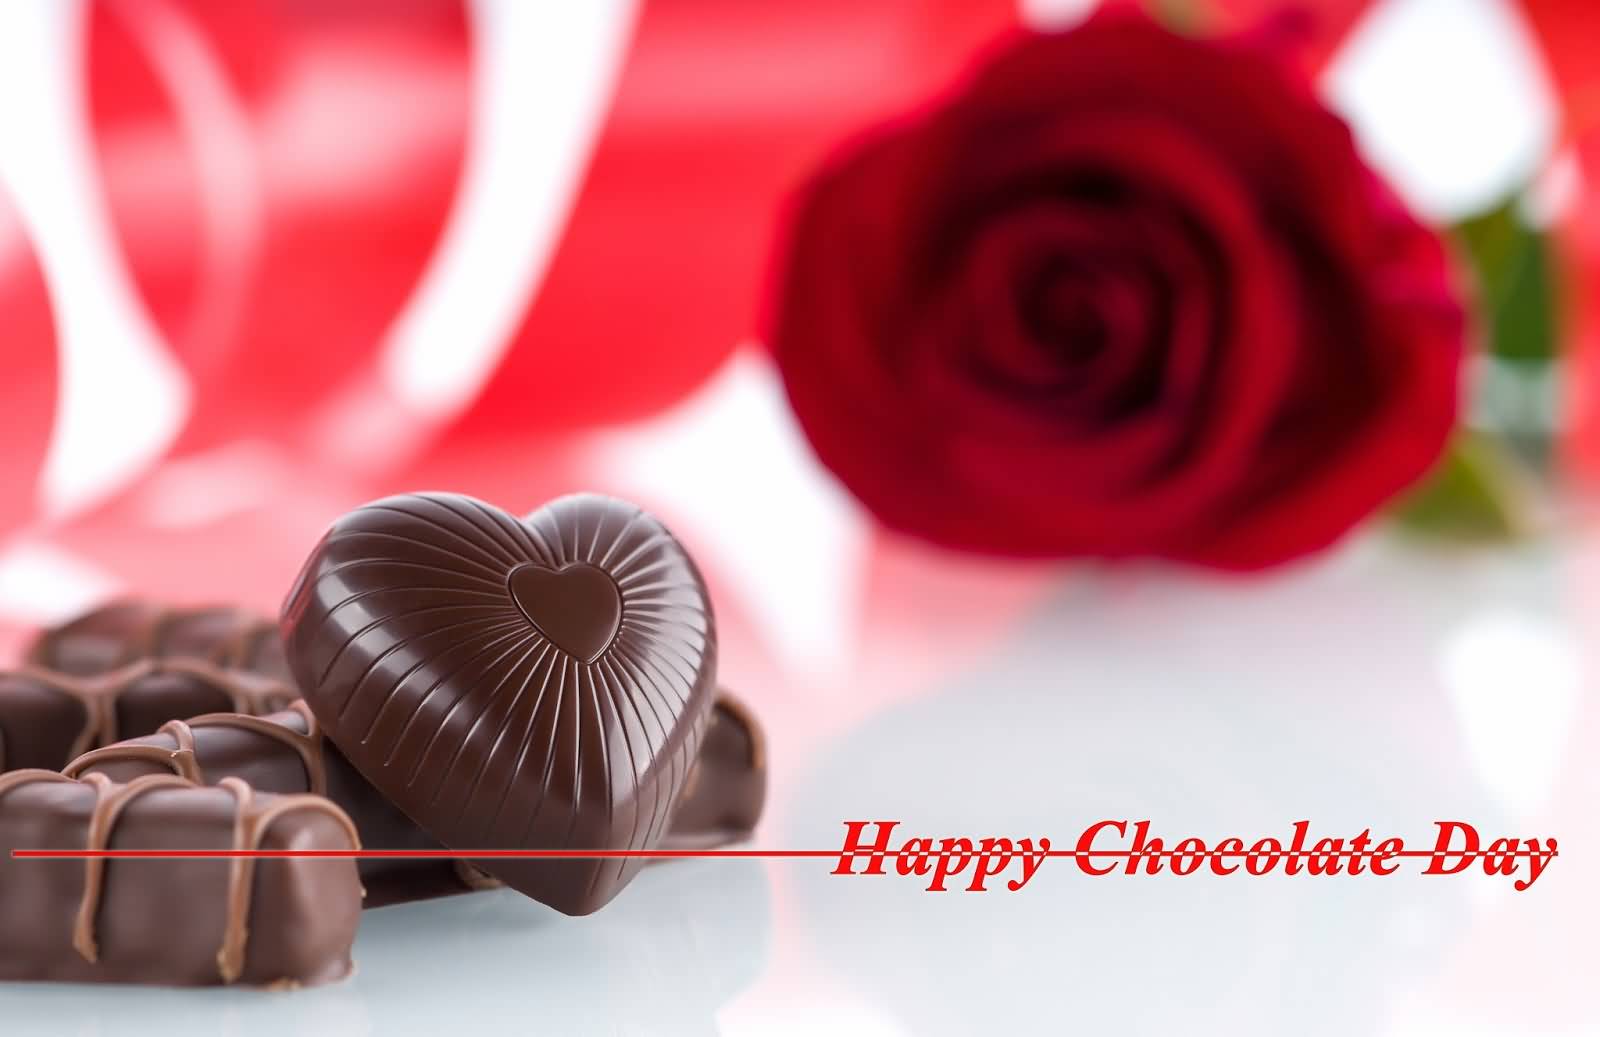 Chocolate Day In Feb Hotsell, GET 54% OFF, www.islandcrematorium.ie